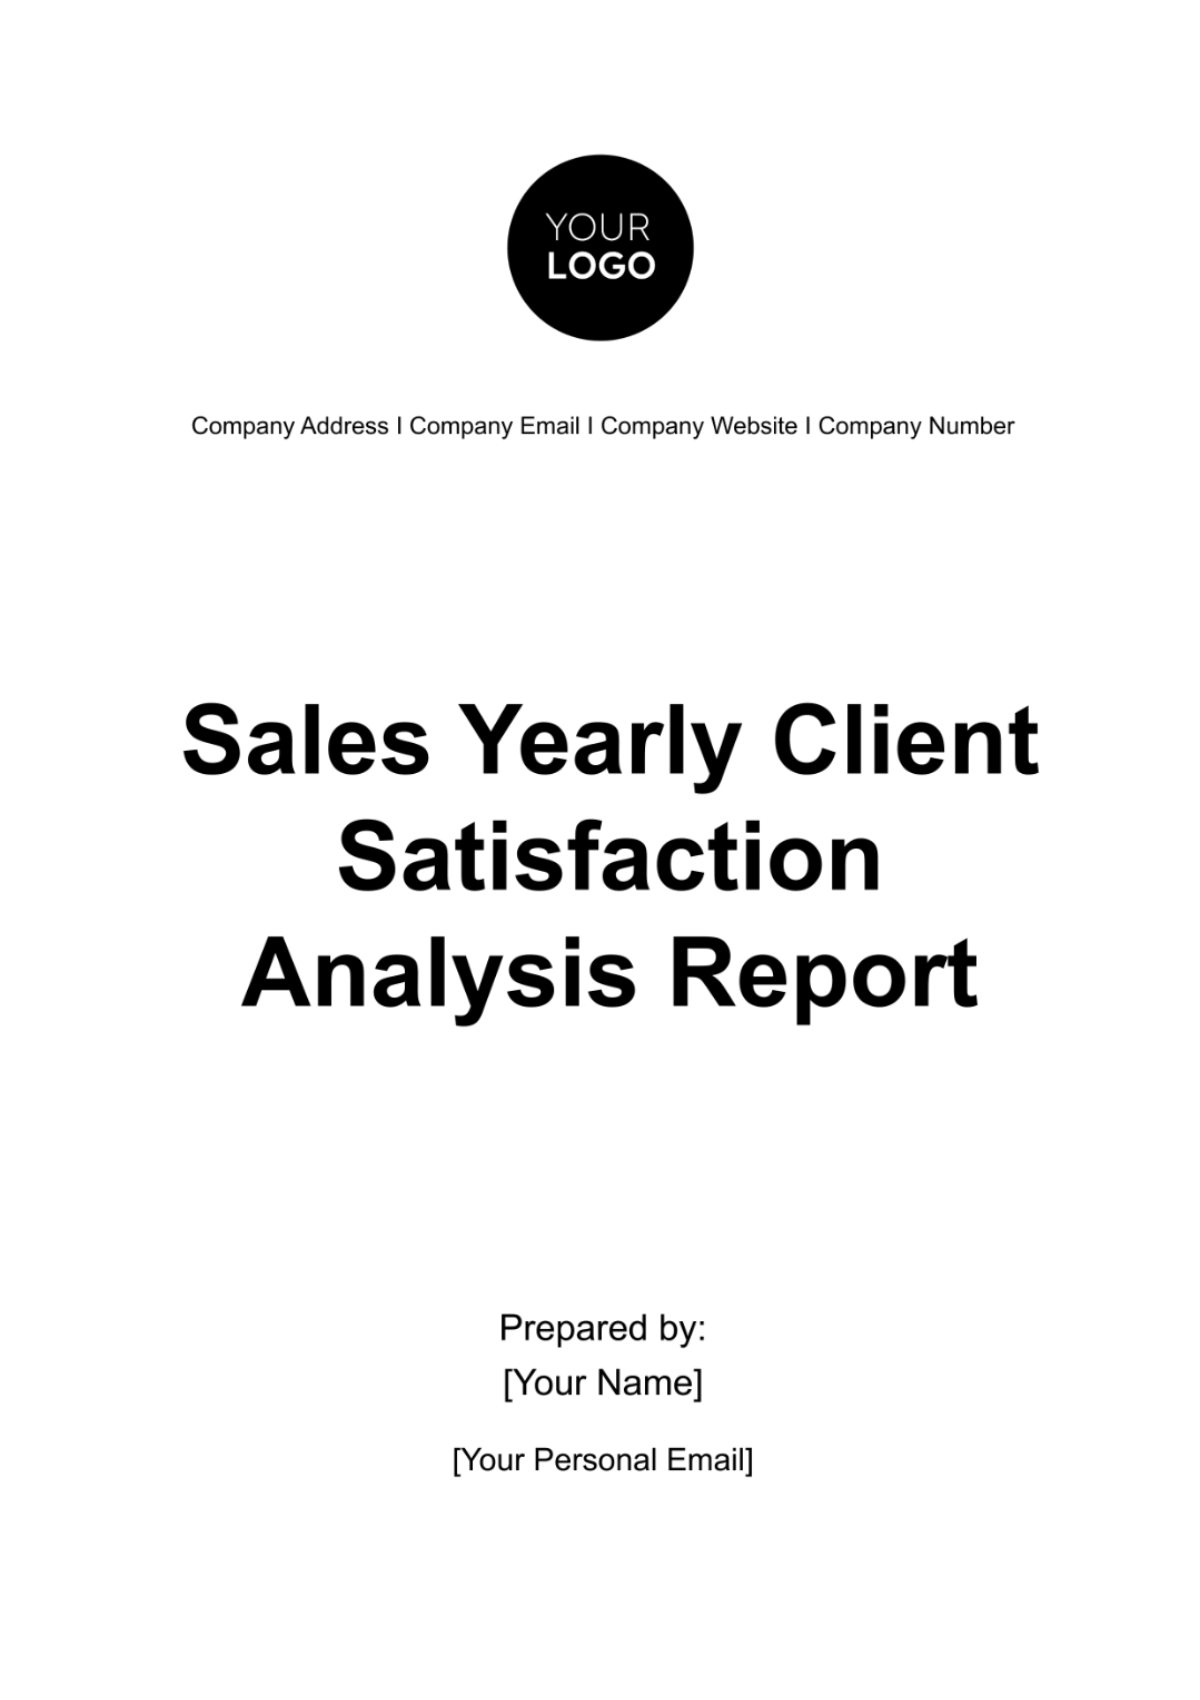 Sales Yearly Client Satisfaction Analysis Report Template